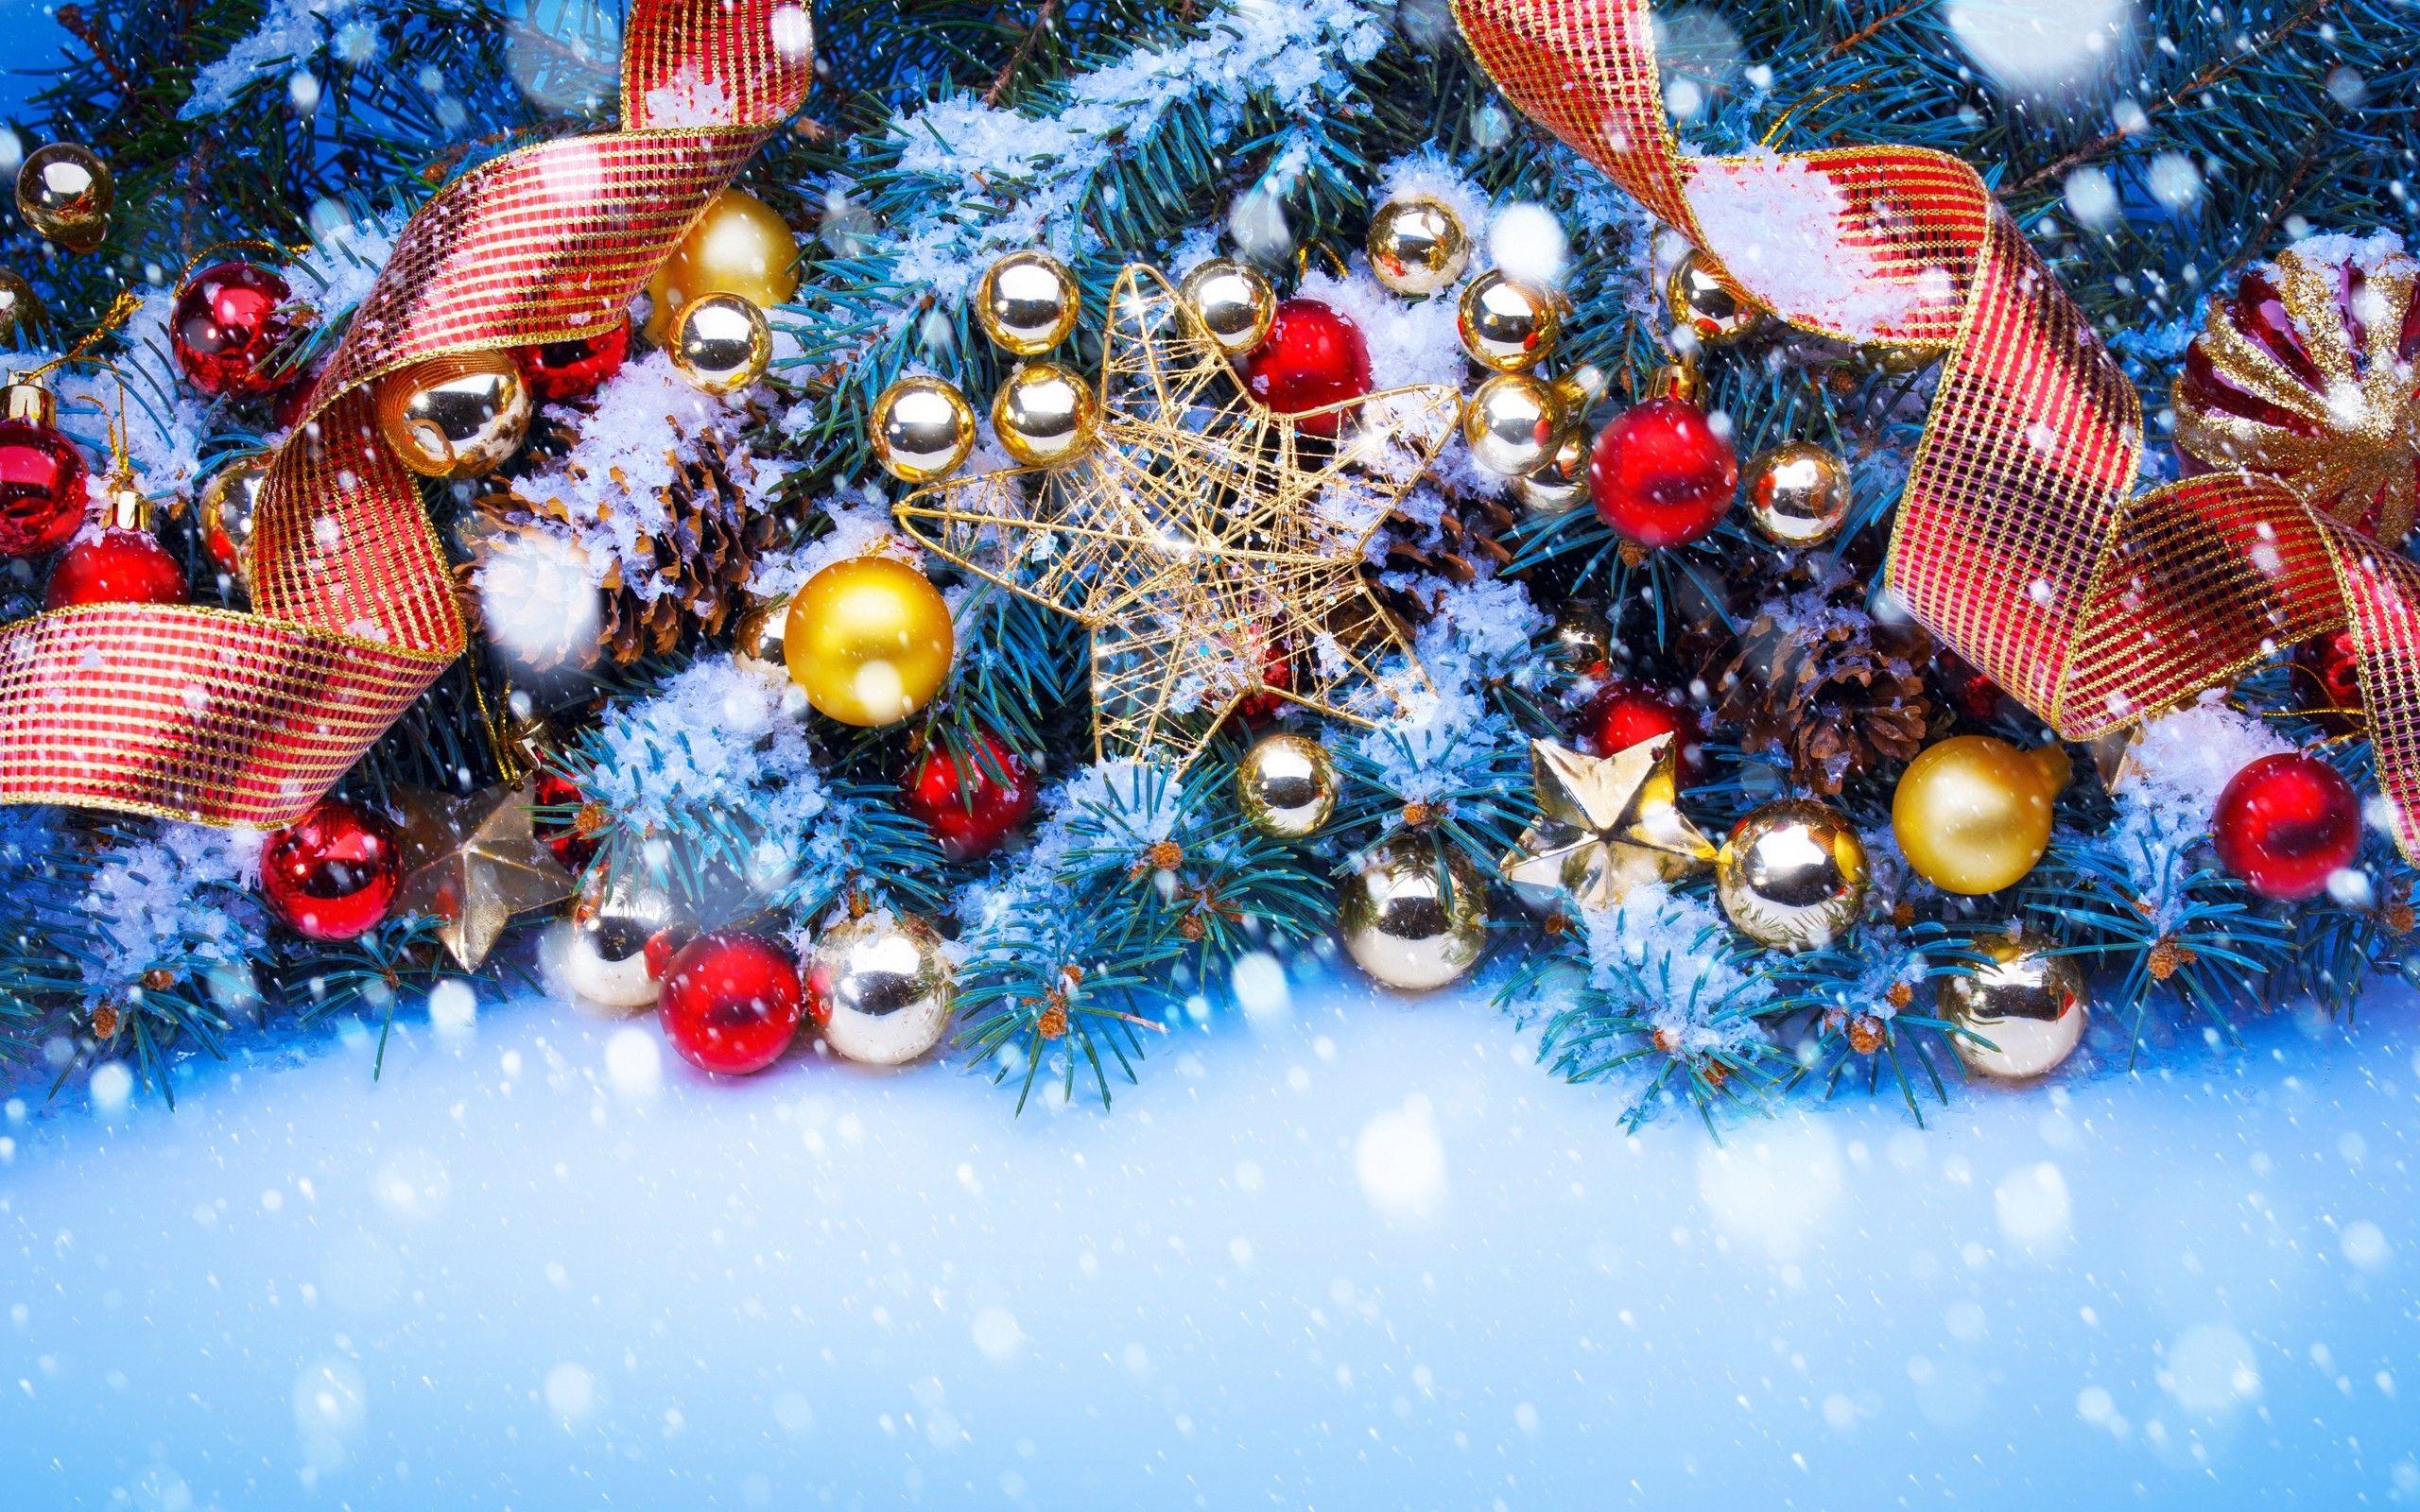 Christmas Ornaments Wallpaper background picture